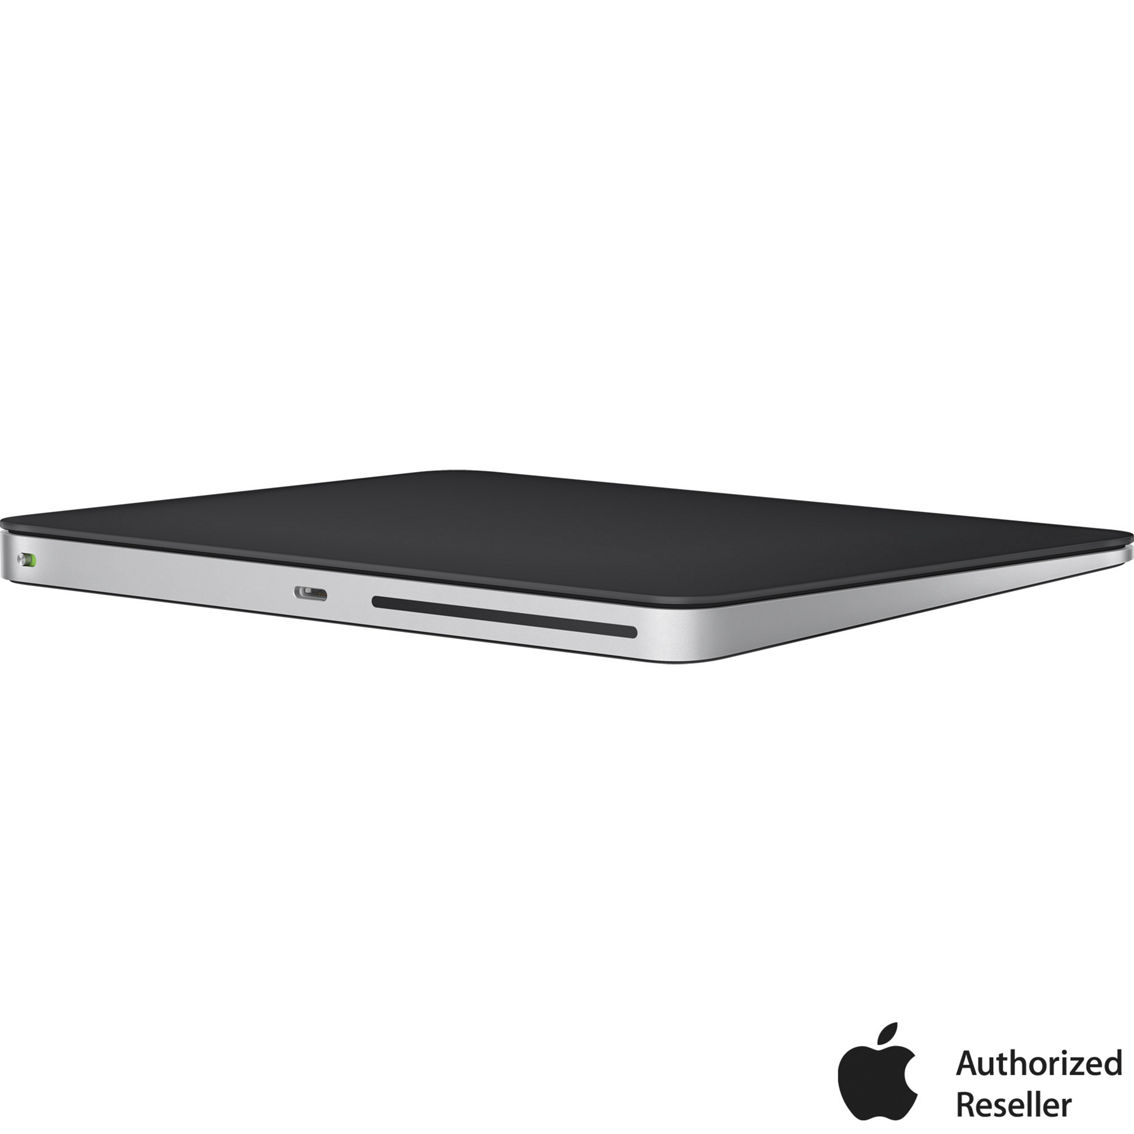 Apple Magic Trackpad Black Multi-Touch Surface - Image 3 of 3